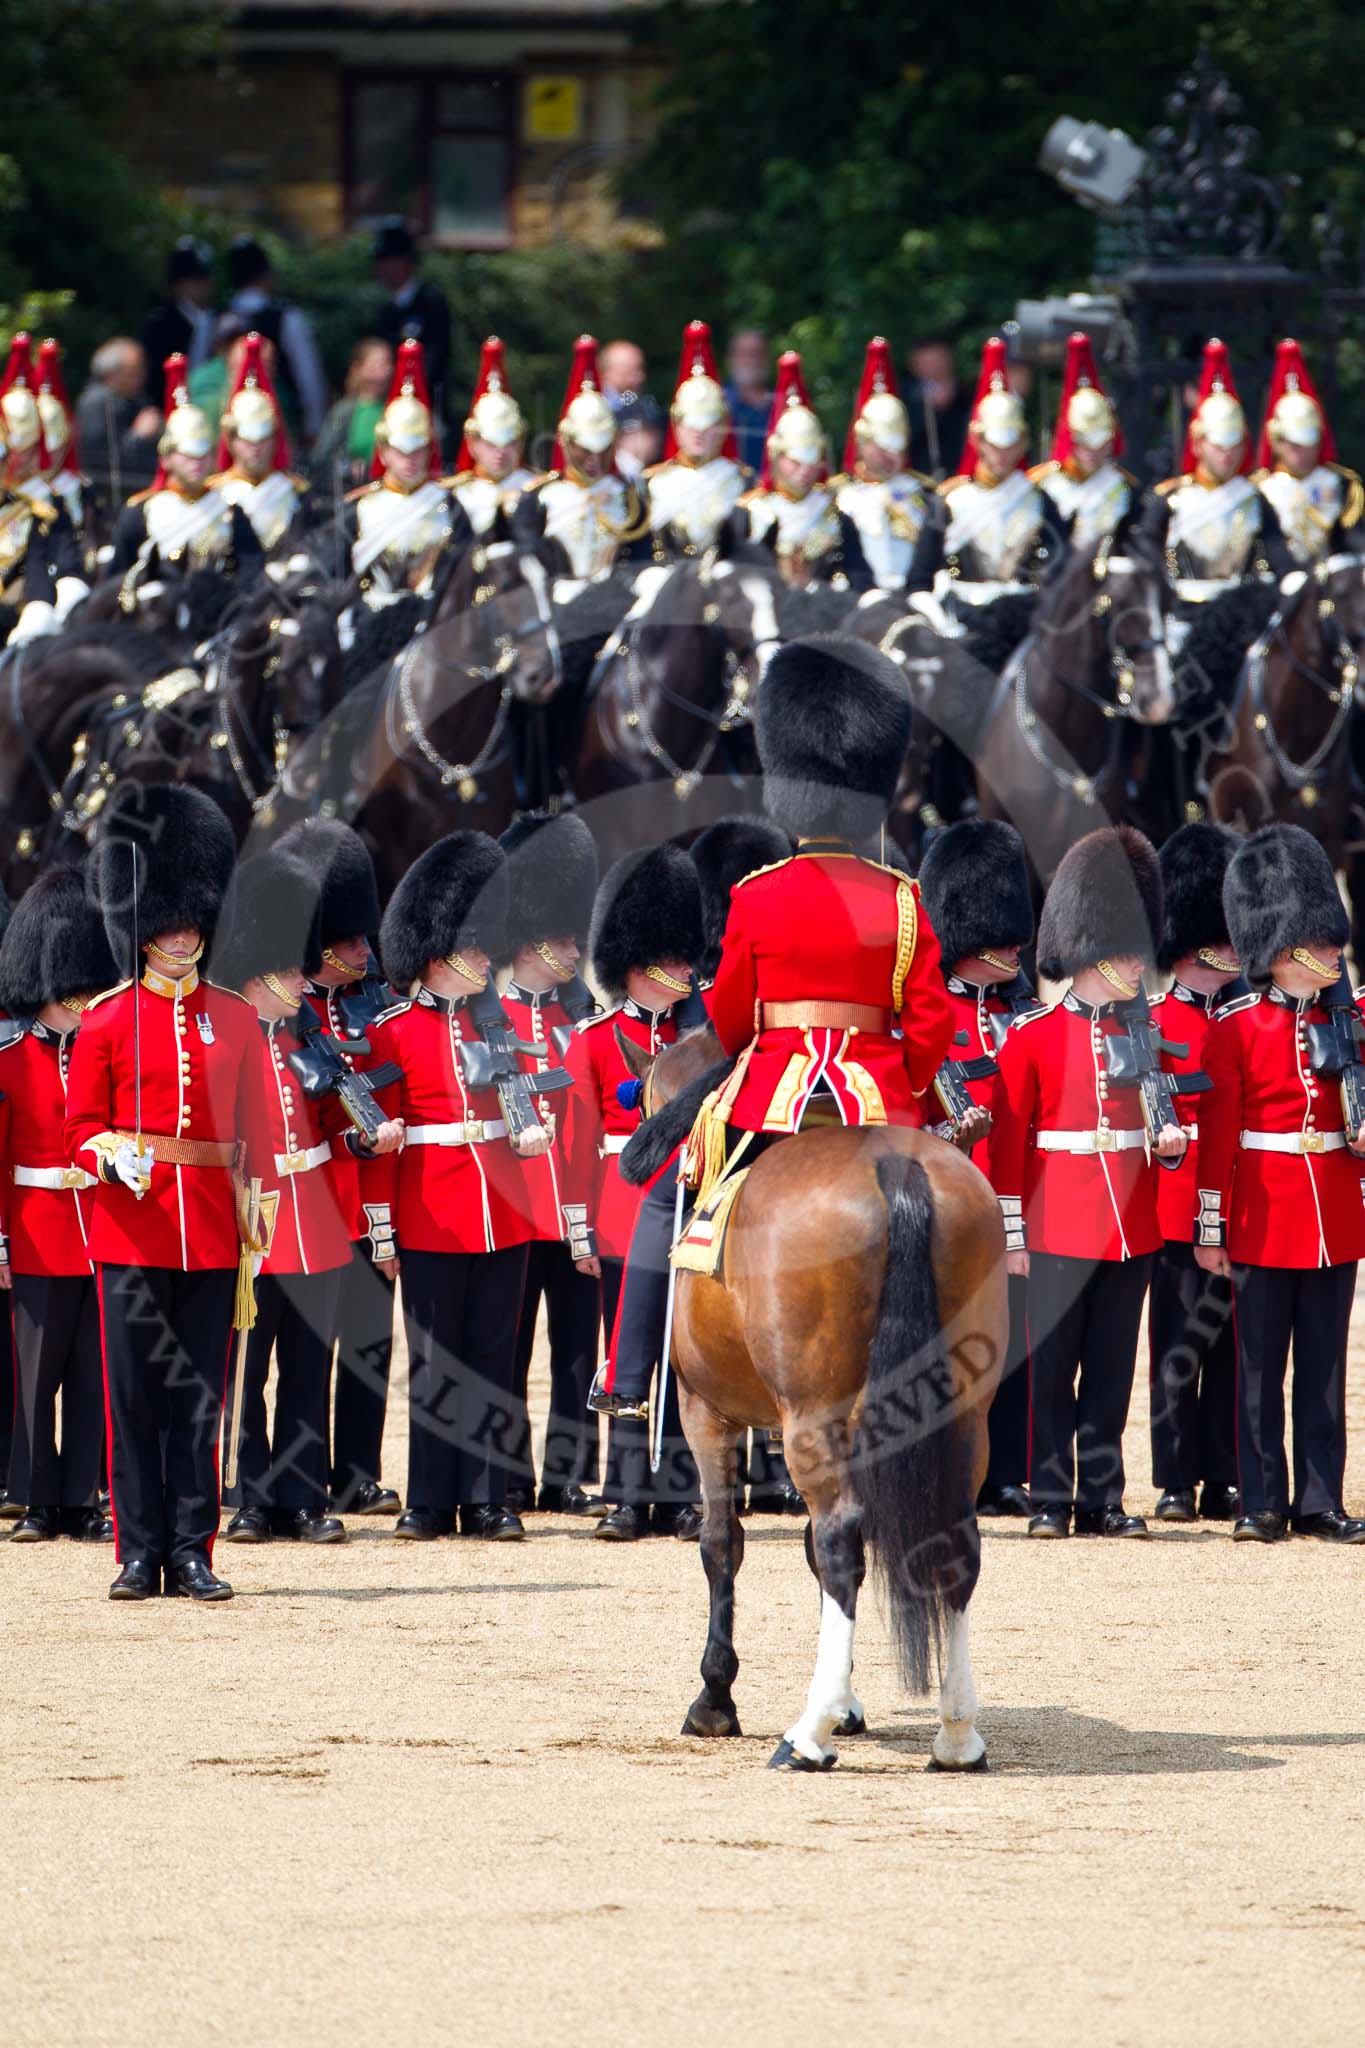 Trooping the Colour 2011: The parade is coming close to the end. The Field Officer, Lincoln Jopp, has asked HM The Queen for permission to march off, he is now addressing the guards..
Horse Guards Parade, Westminster,
London SW1,
Greater London,
United Kingdom,
on 11 June 2011 at 12:03, image #382